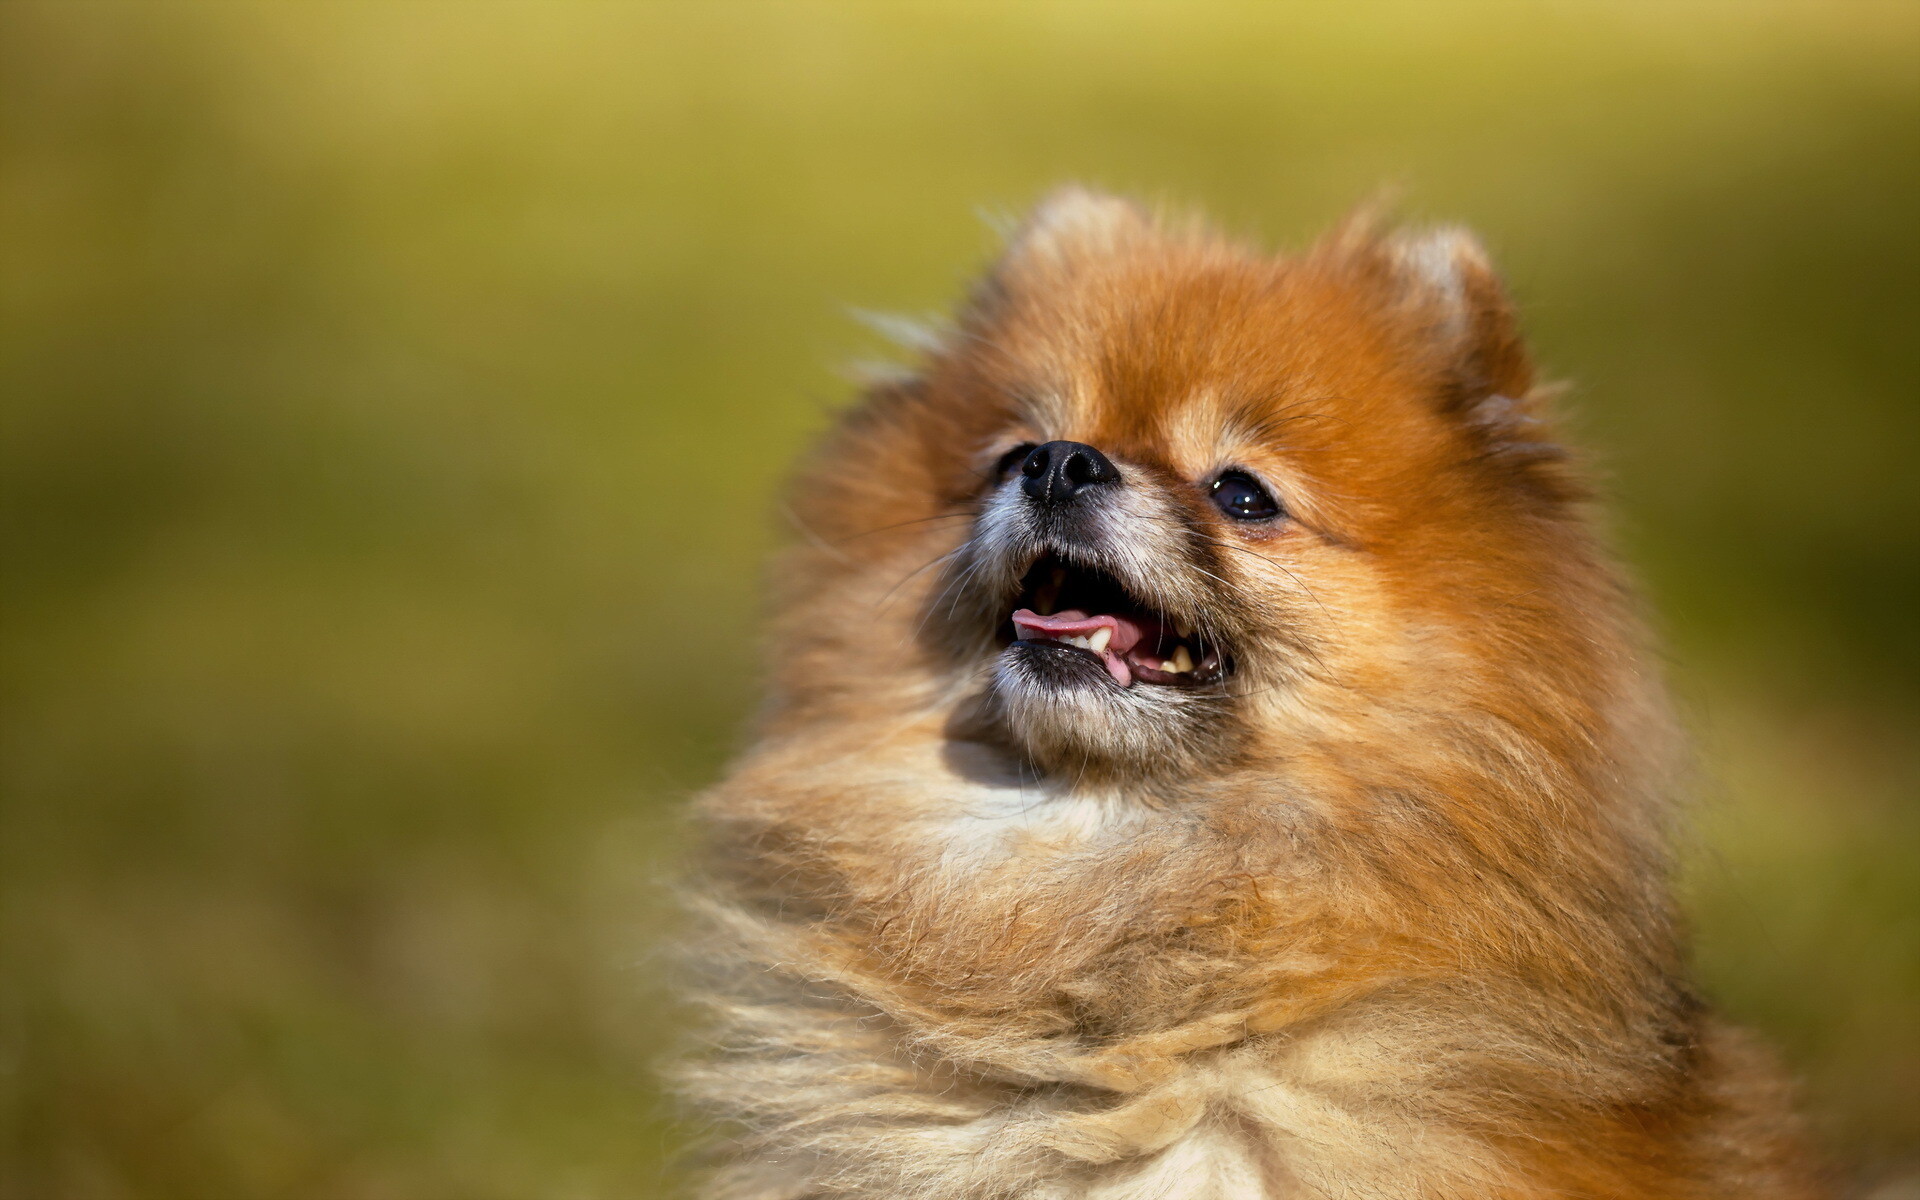 Pomeranian: The breed has been among the more popular dog breeds in the United States. 1920x1200 HD Wallpaper.